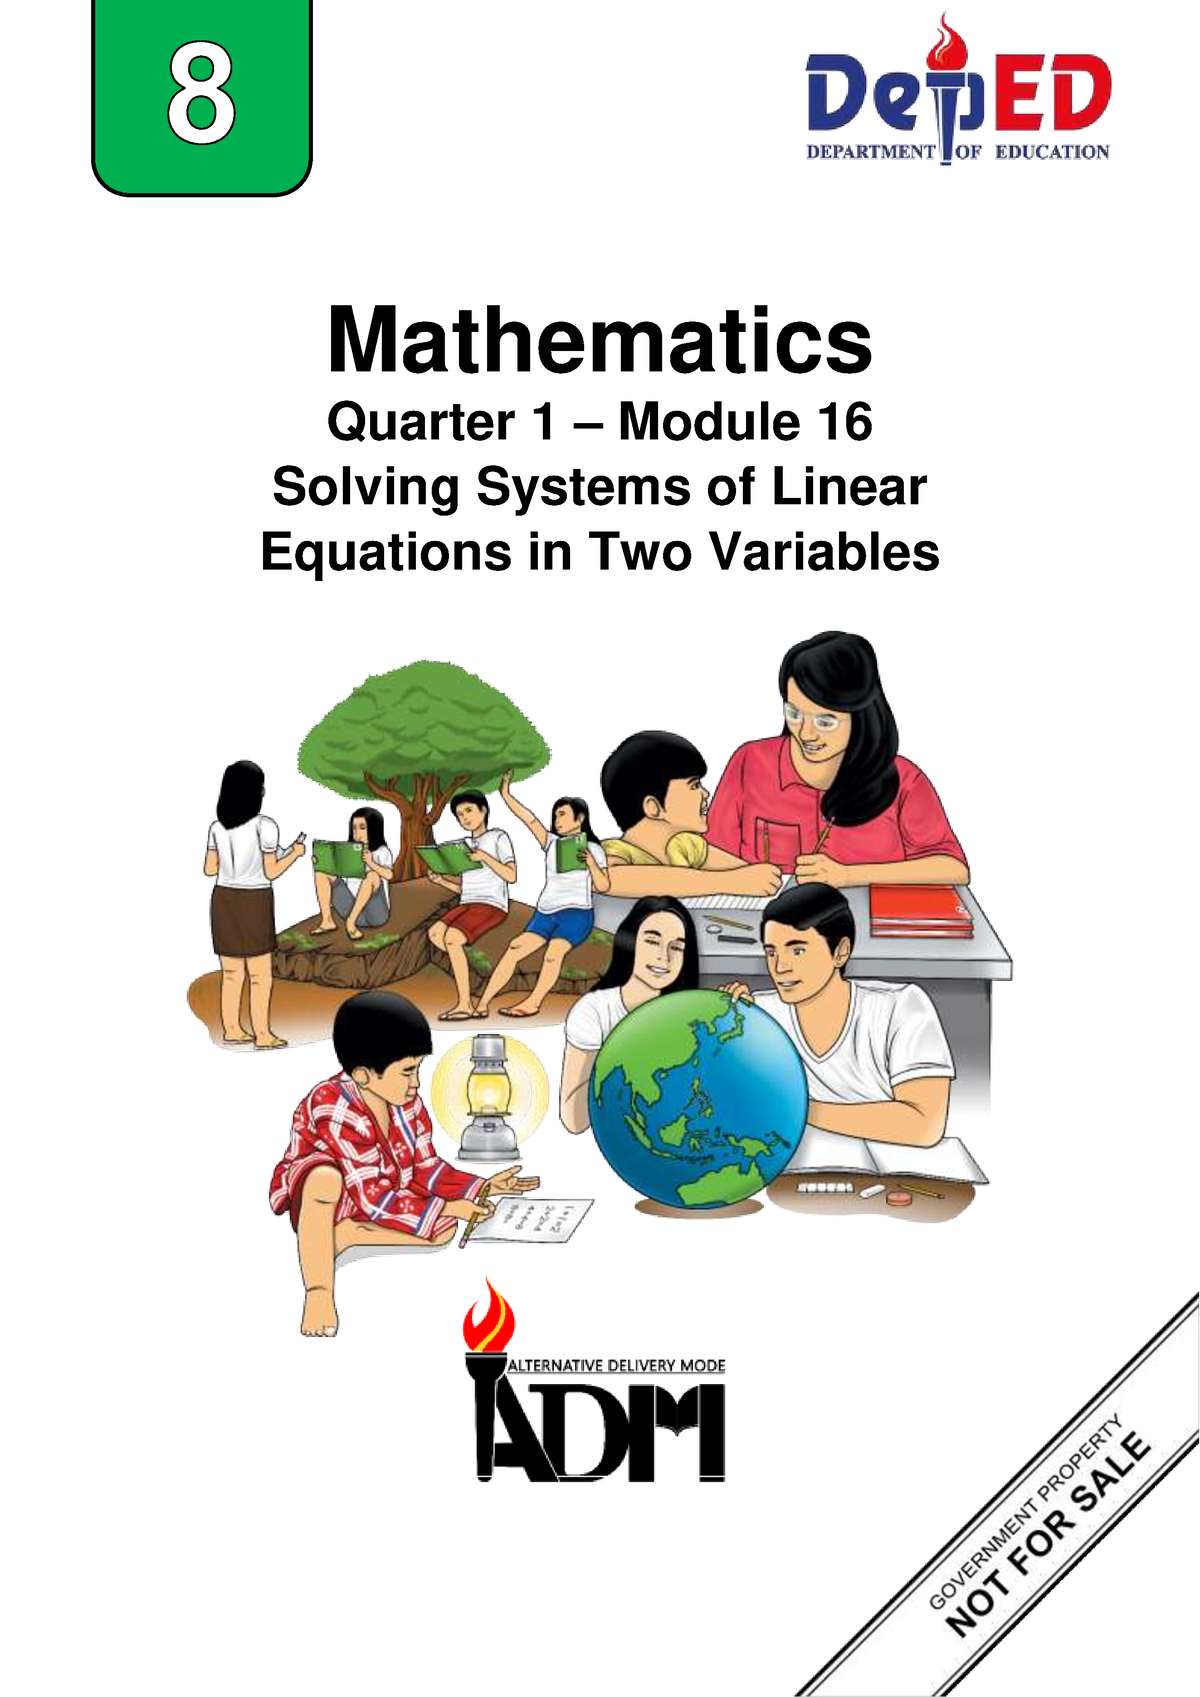 math8-q1-mod16-solving-systems-of-linear-equations-in-two-variables